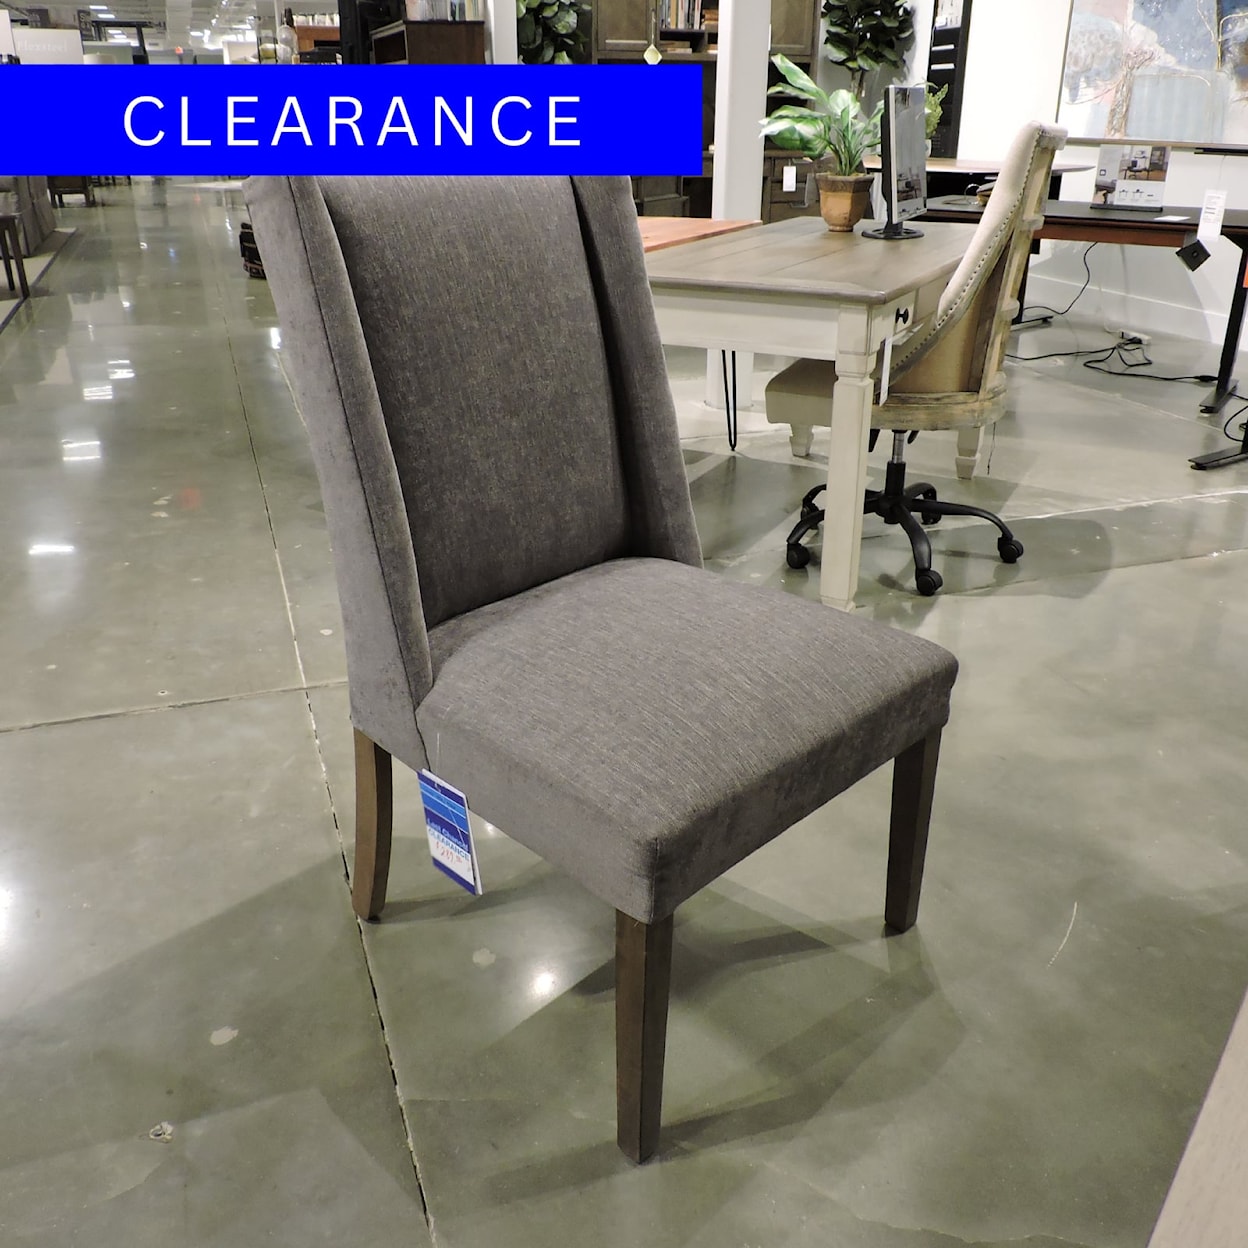 Miscellaneous Clearance Upholstered Dining Chair